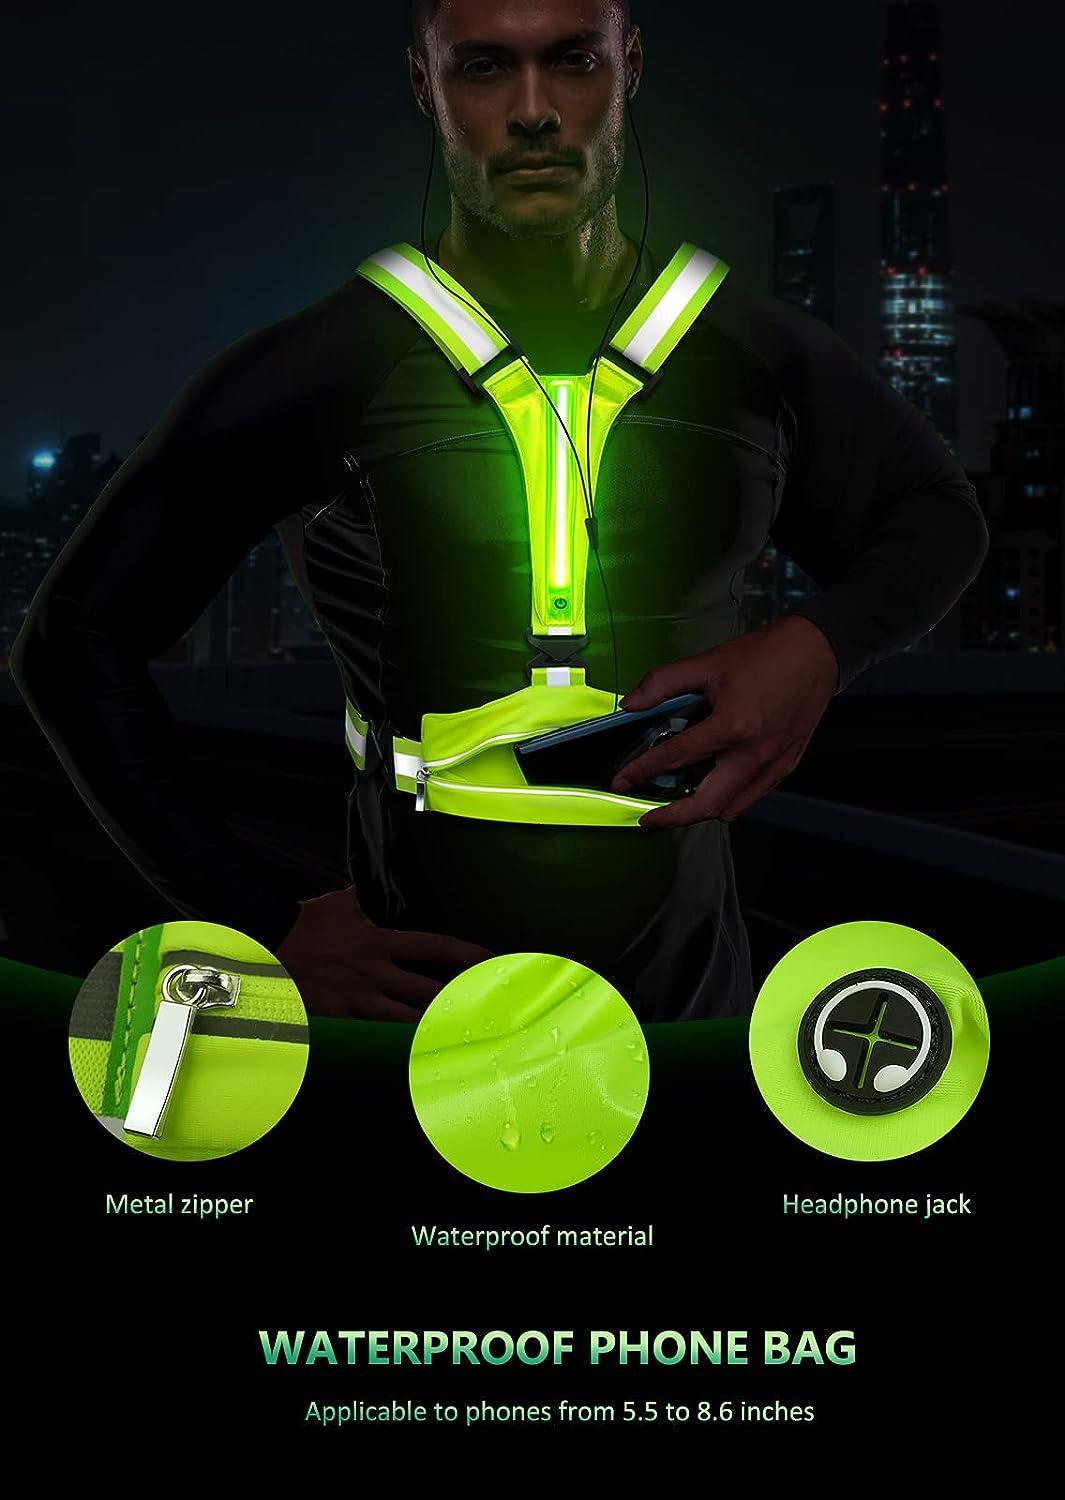 Led Reflective Vest Adjustable Rechargeable High Visibility Outdoor Night  Running Riding Walking Light Up Vest 